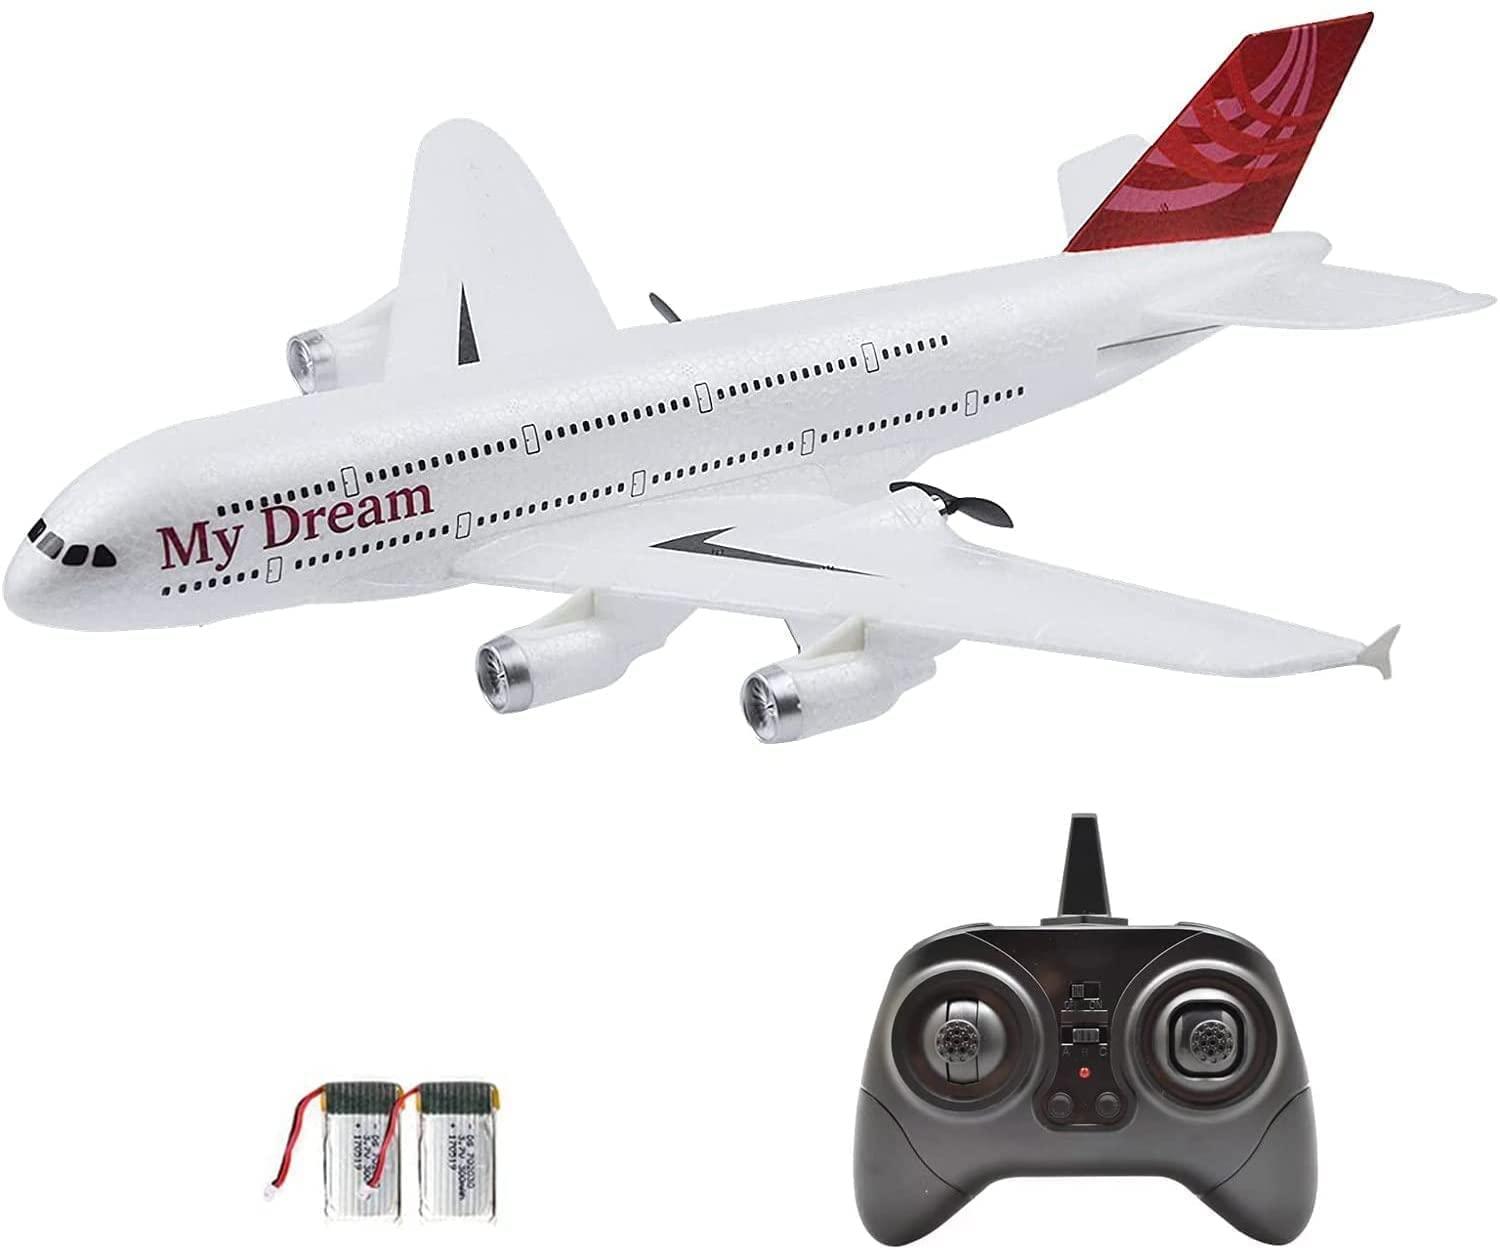 Aeroplane Flying Remote Control: Types of Aeroplane Flying Remote Controls Available